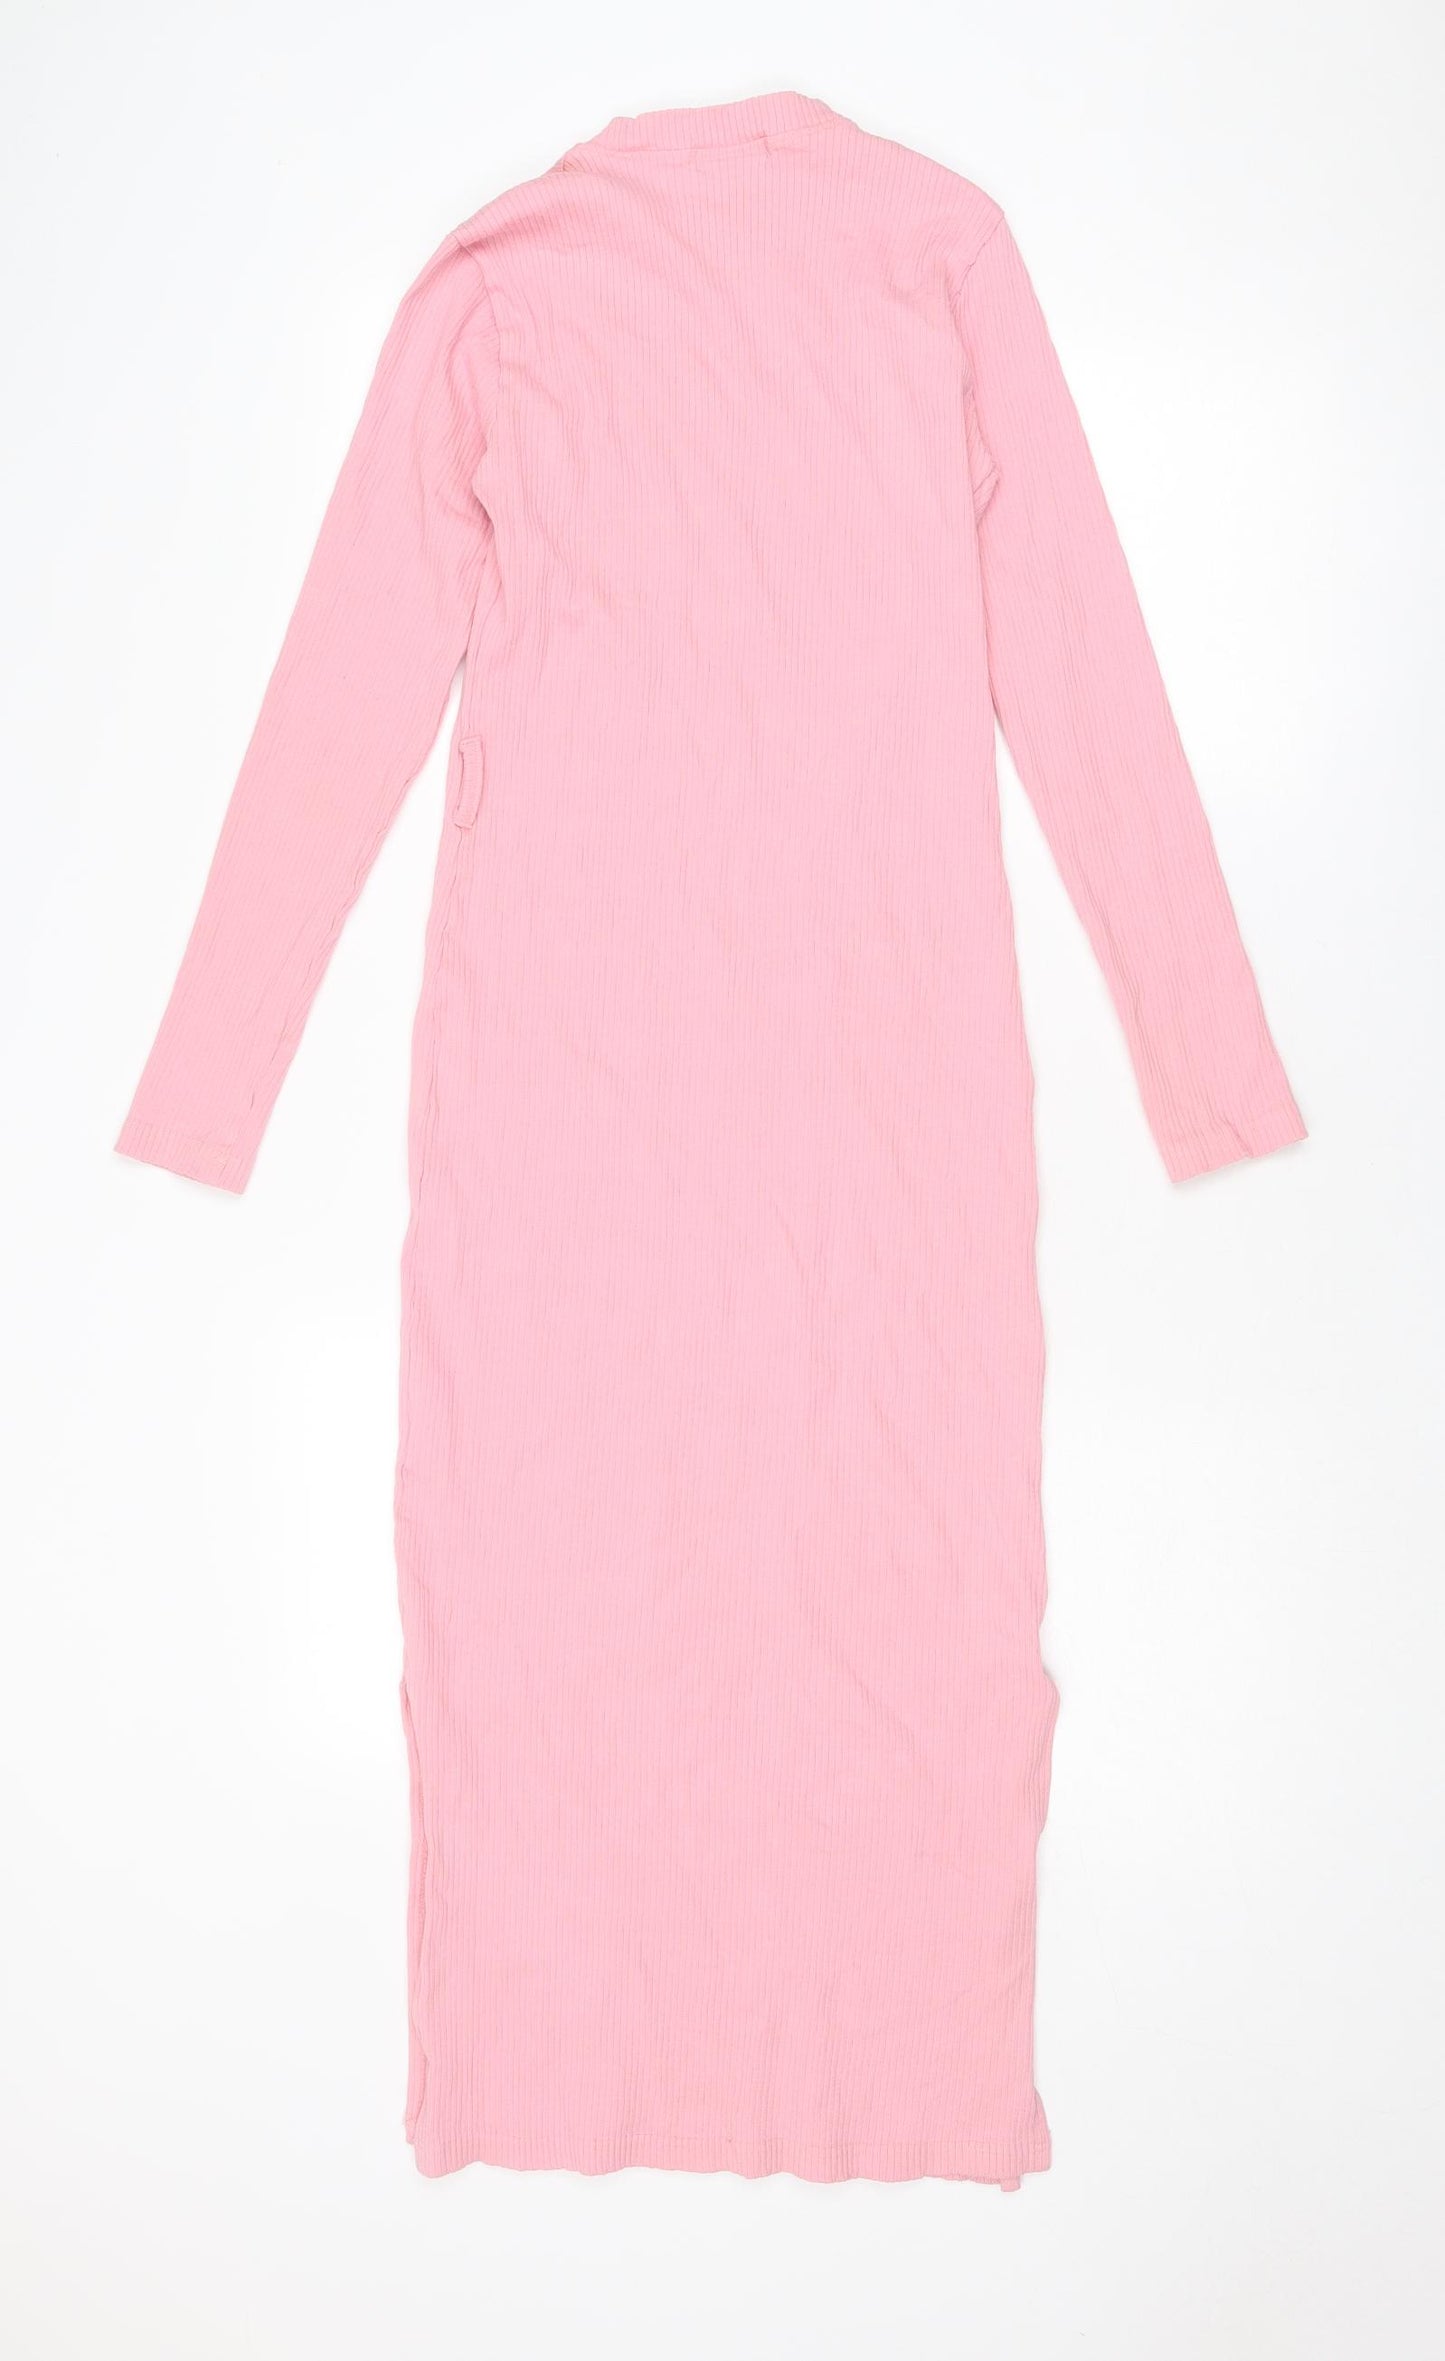 Missguided Womens Pink Cotton Jumper Dress Size 12 Round Neck Pullover